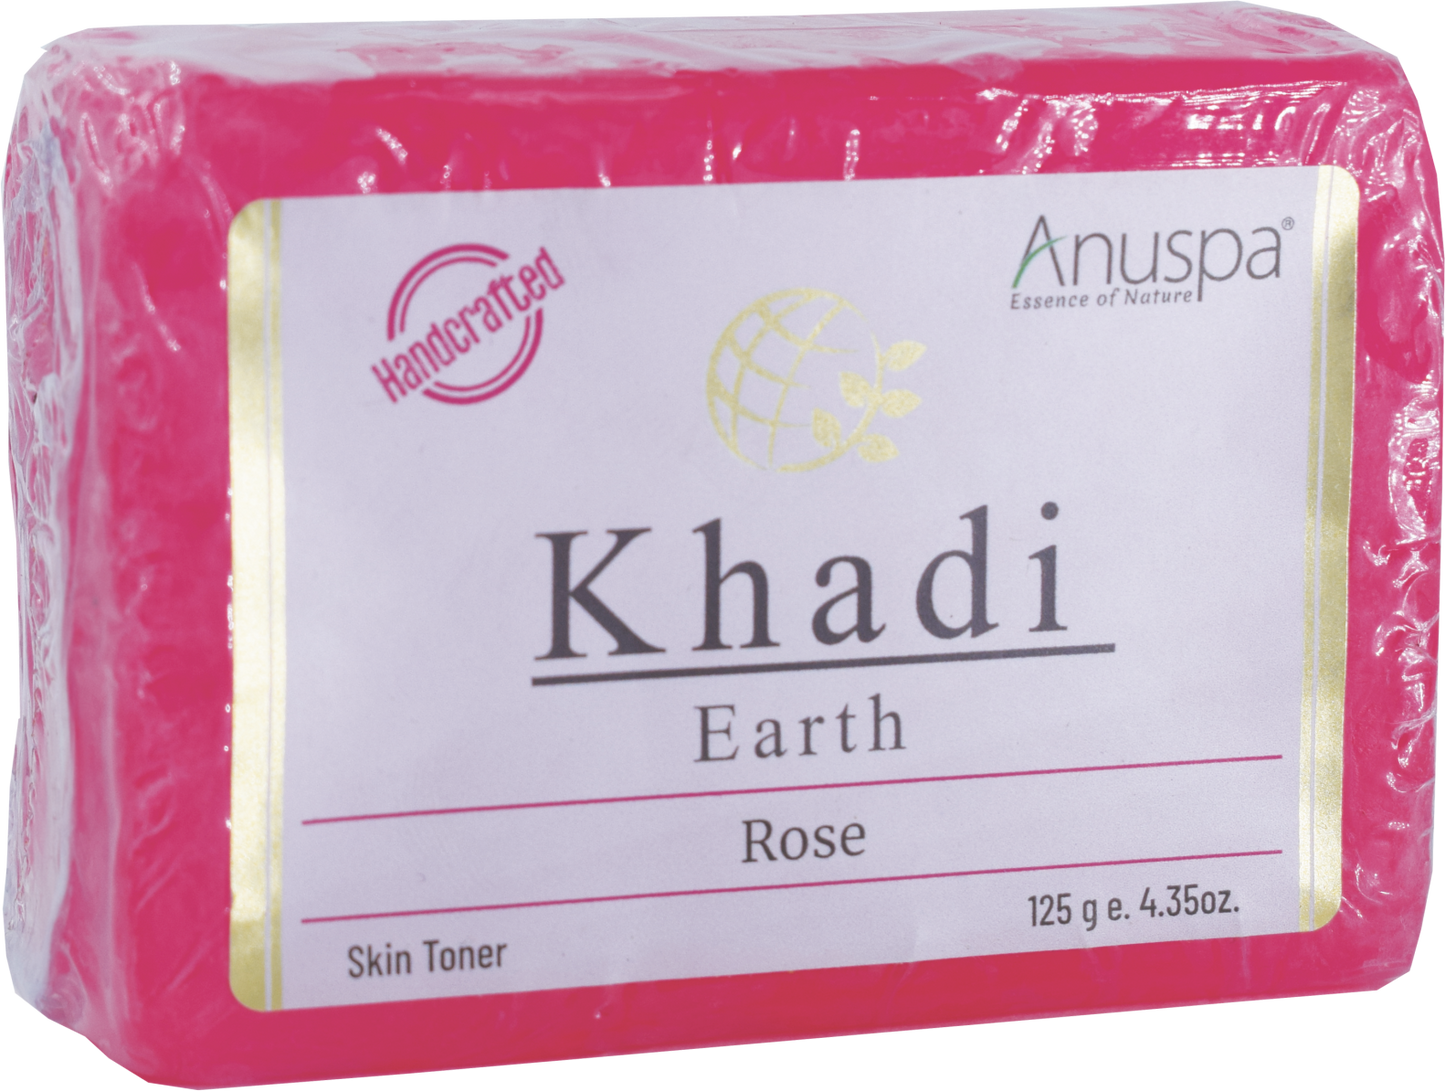 Anuspa Handcrafted Herbal Khadi Earth Rose Bar for Tranquility Blend, (125g )